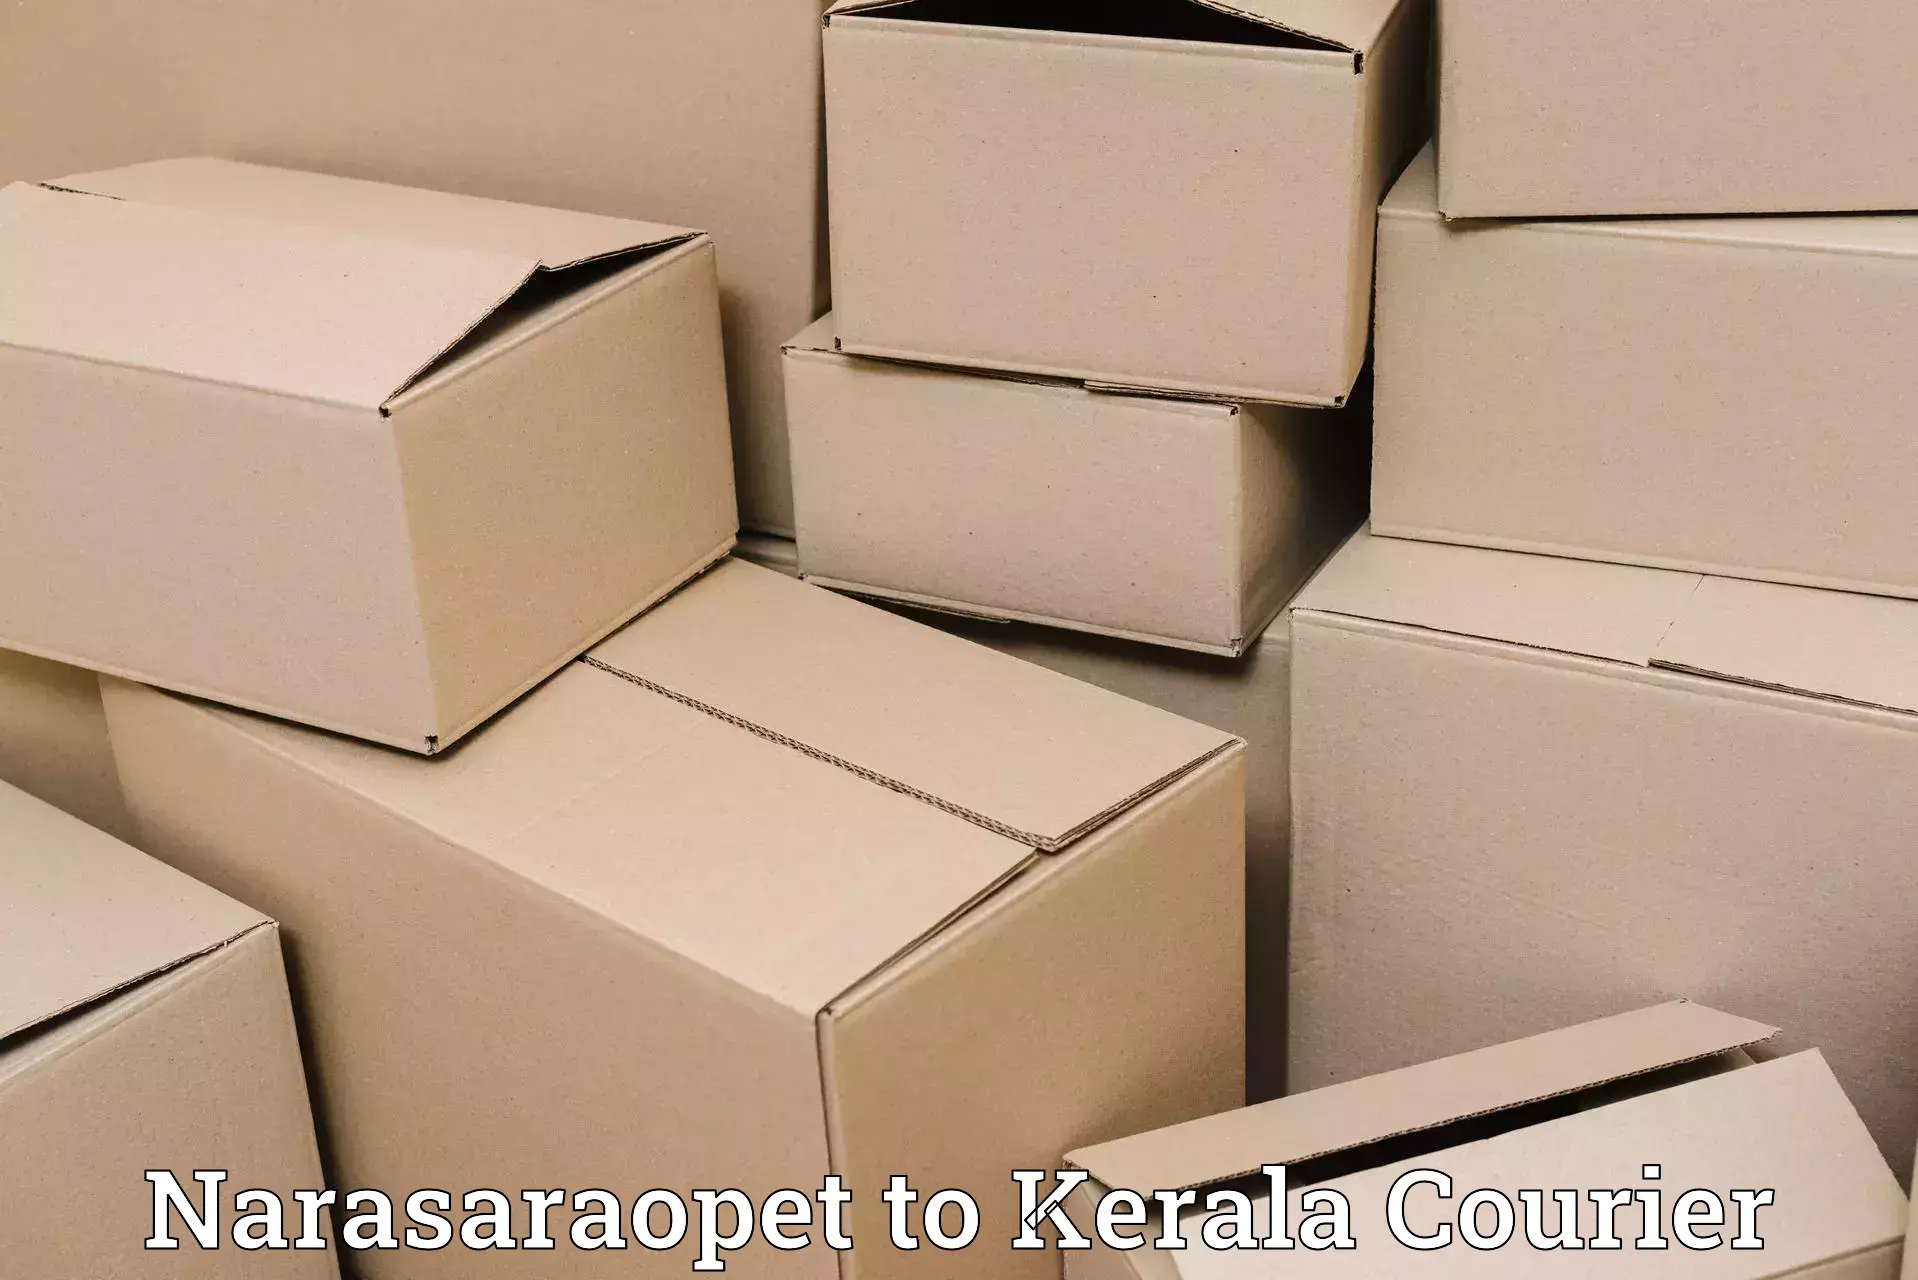 Streamlined delivery processes Narasaraopet to Kerala